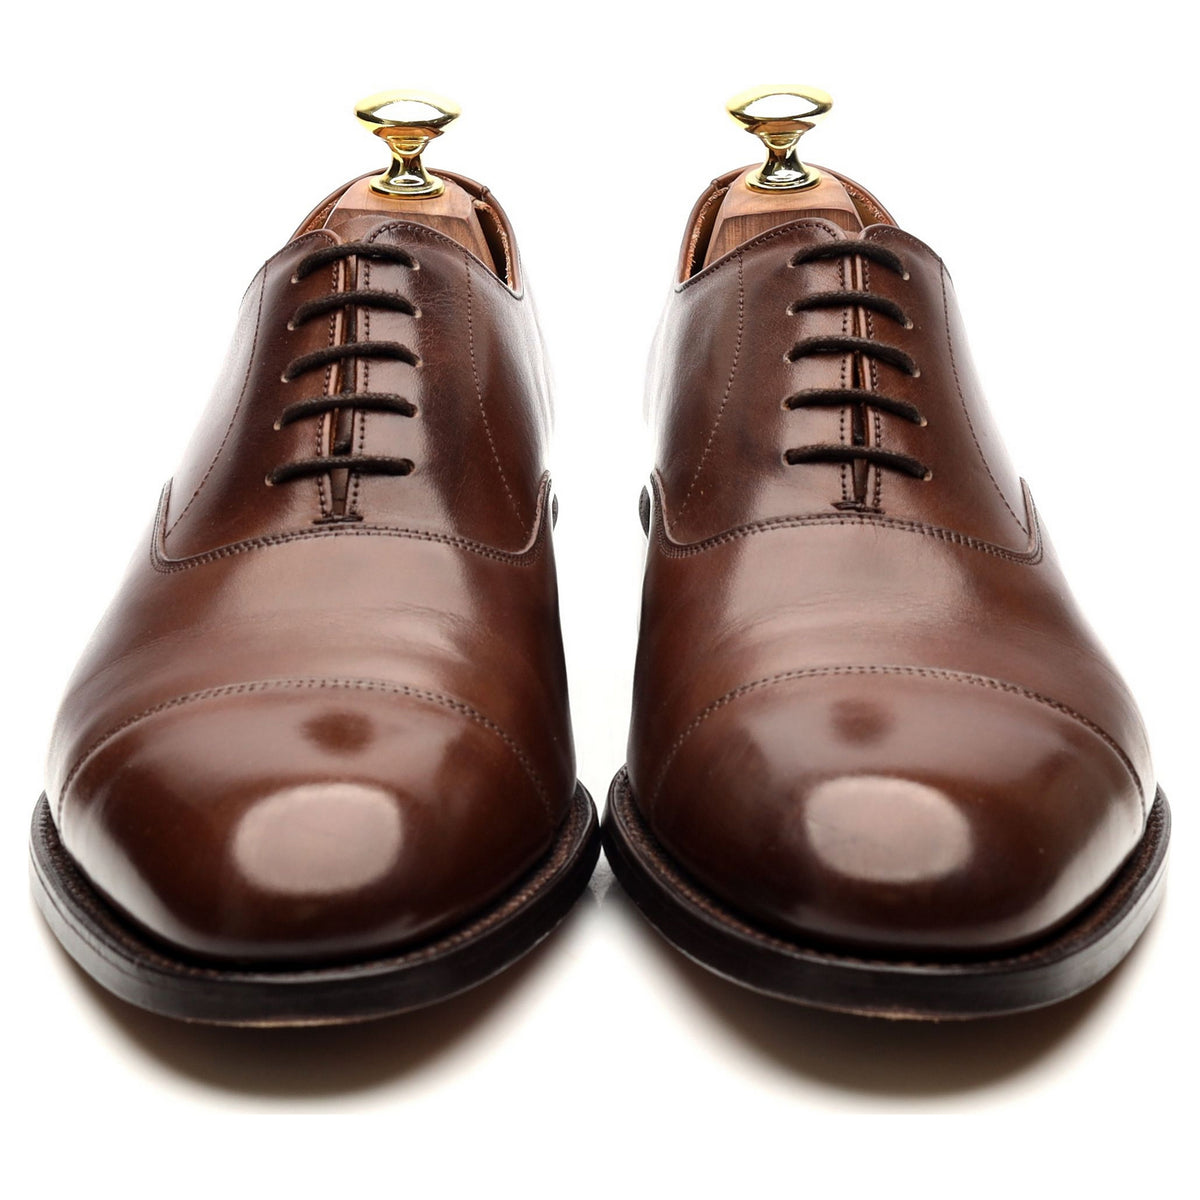 &#39;Mayfair&#39; Brown Leather Oxford UK 8 F